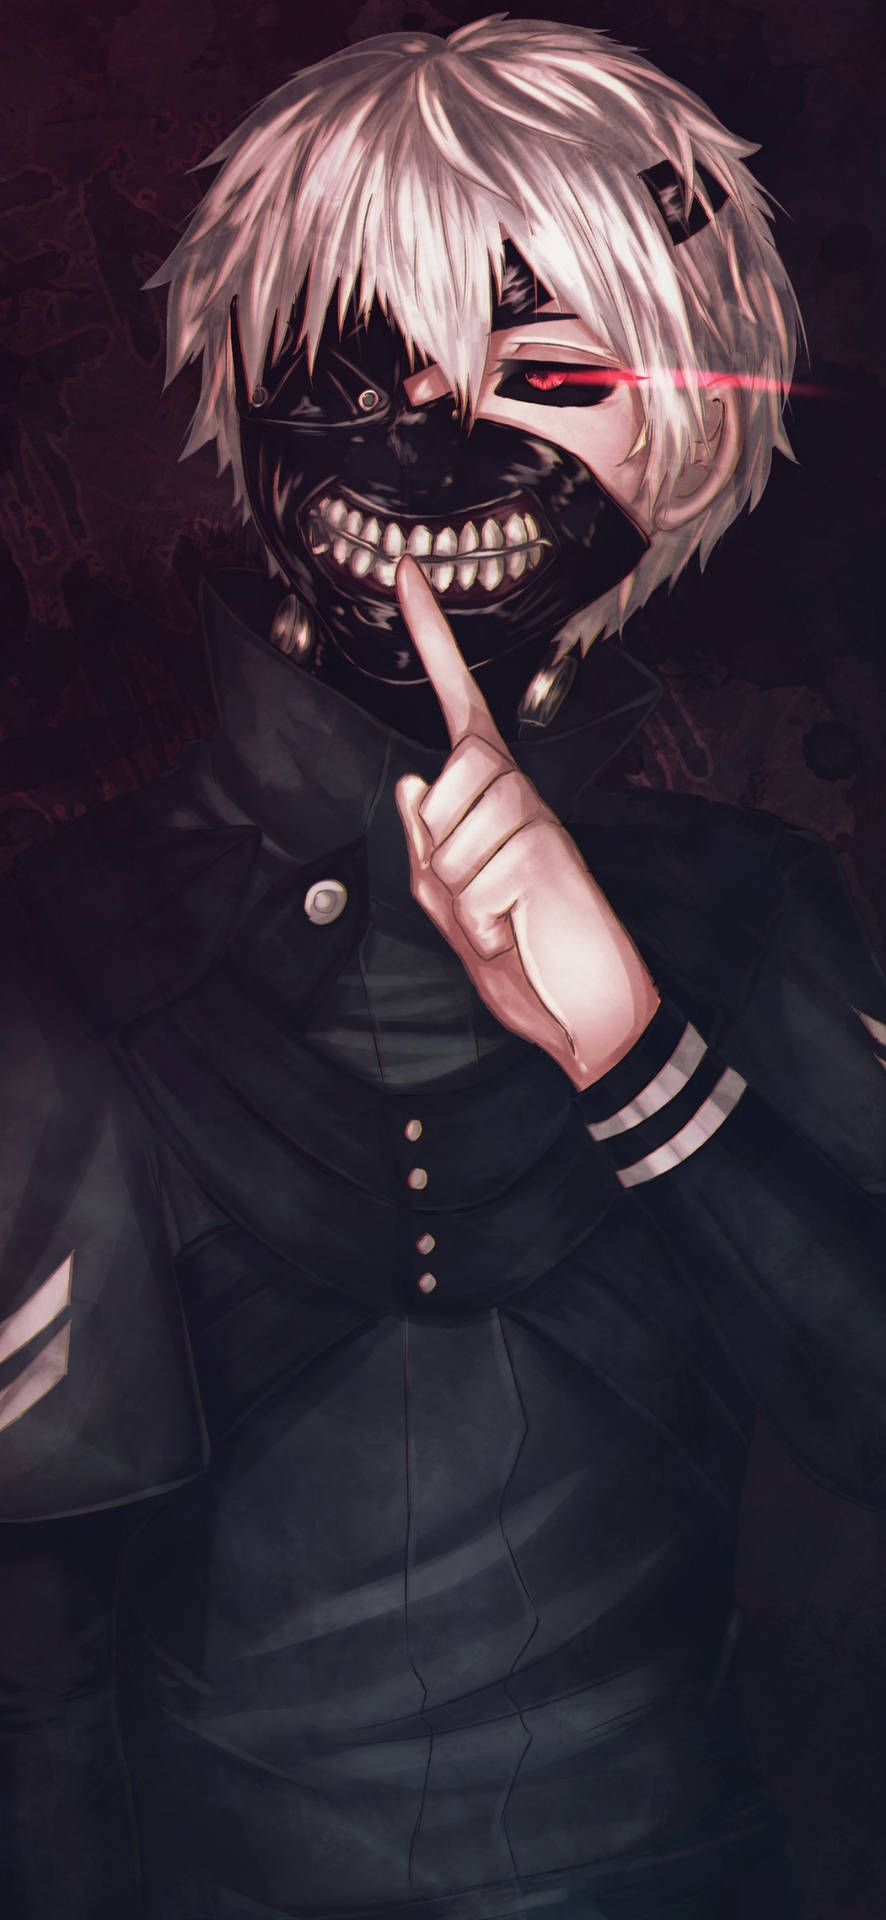 Cool Graphic Art Ken Tokyo Ghoul Iphone Background Background